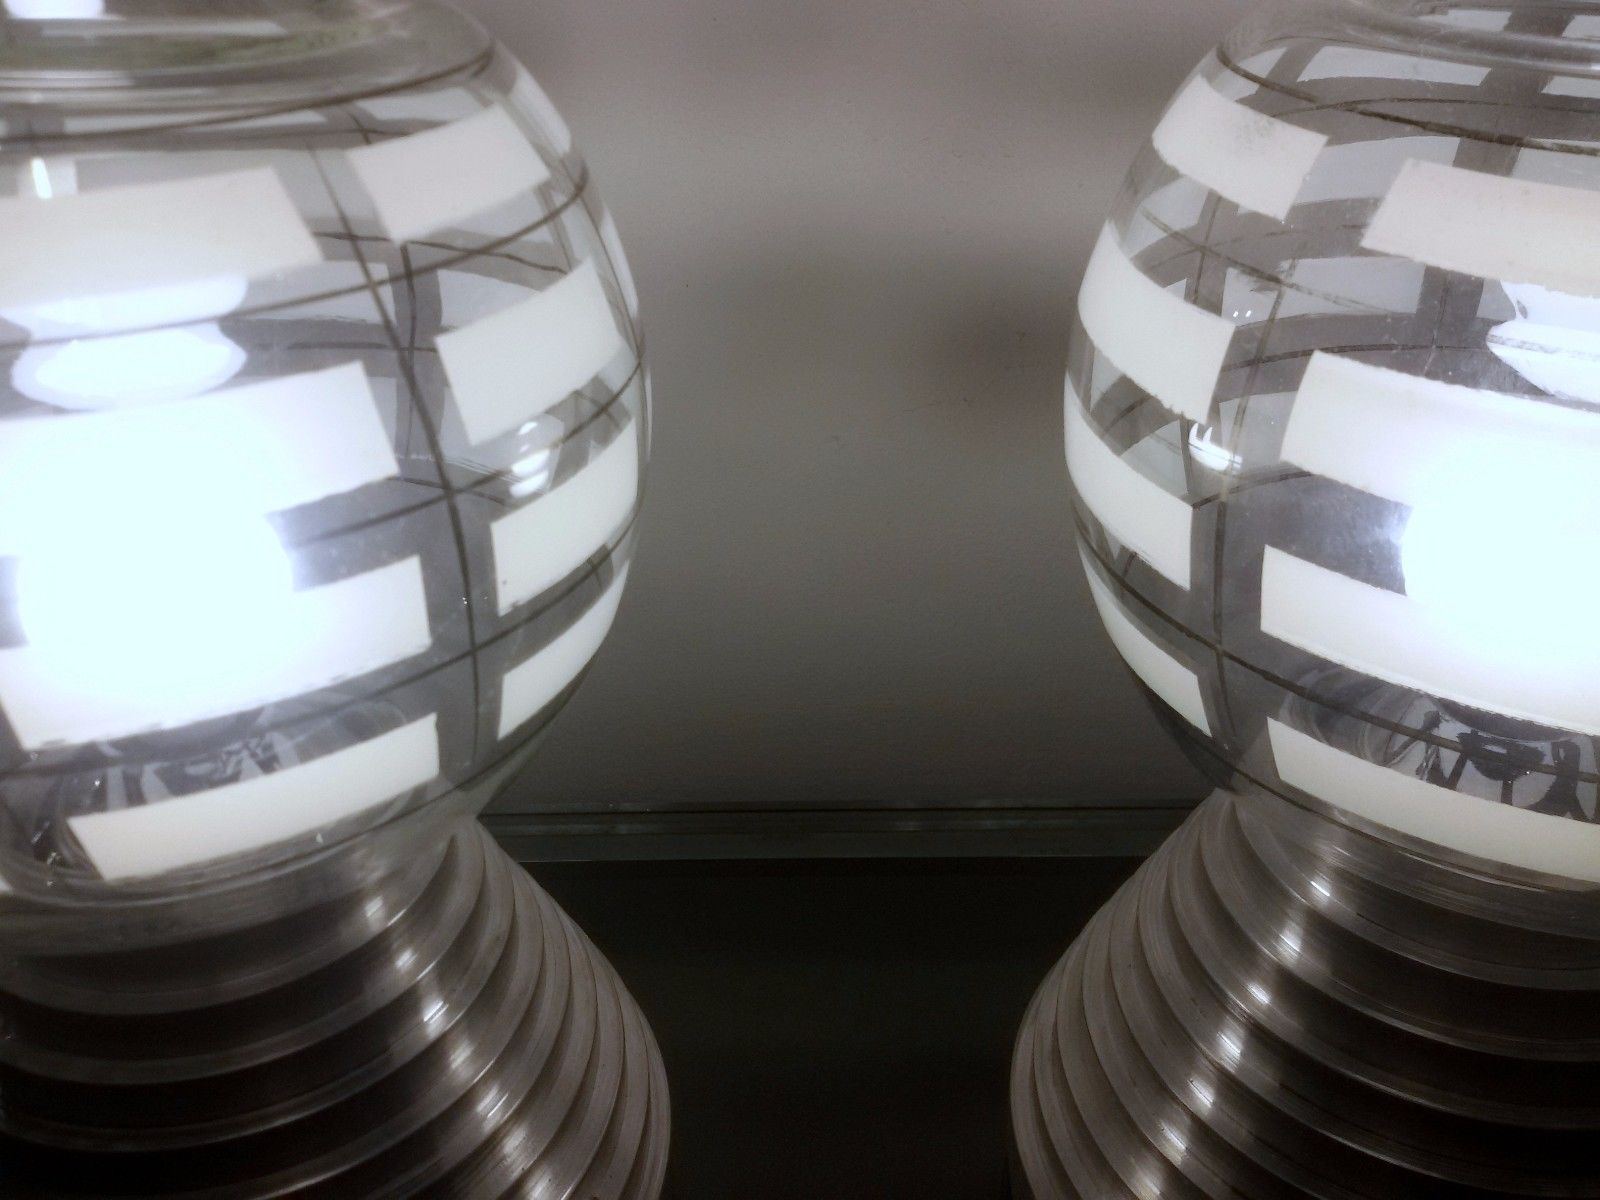 SUPERB pair of Mid Century Modern  Atomic Space Age Style Era Table Lamps